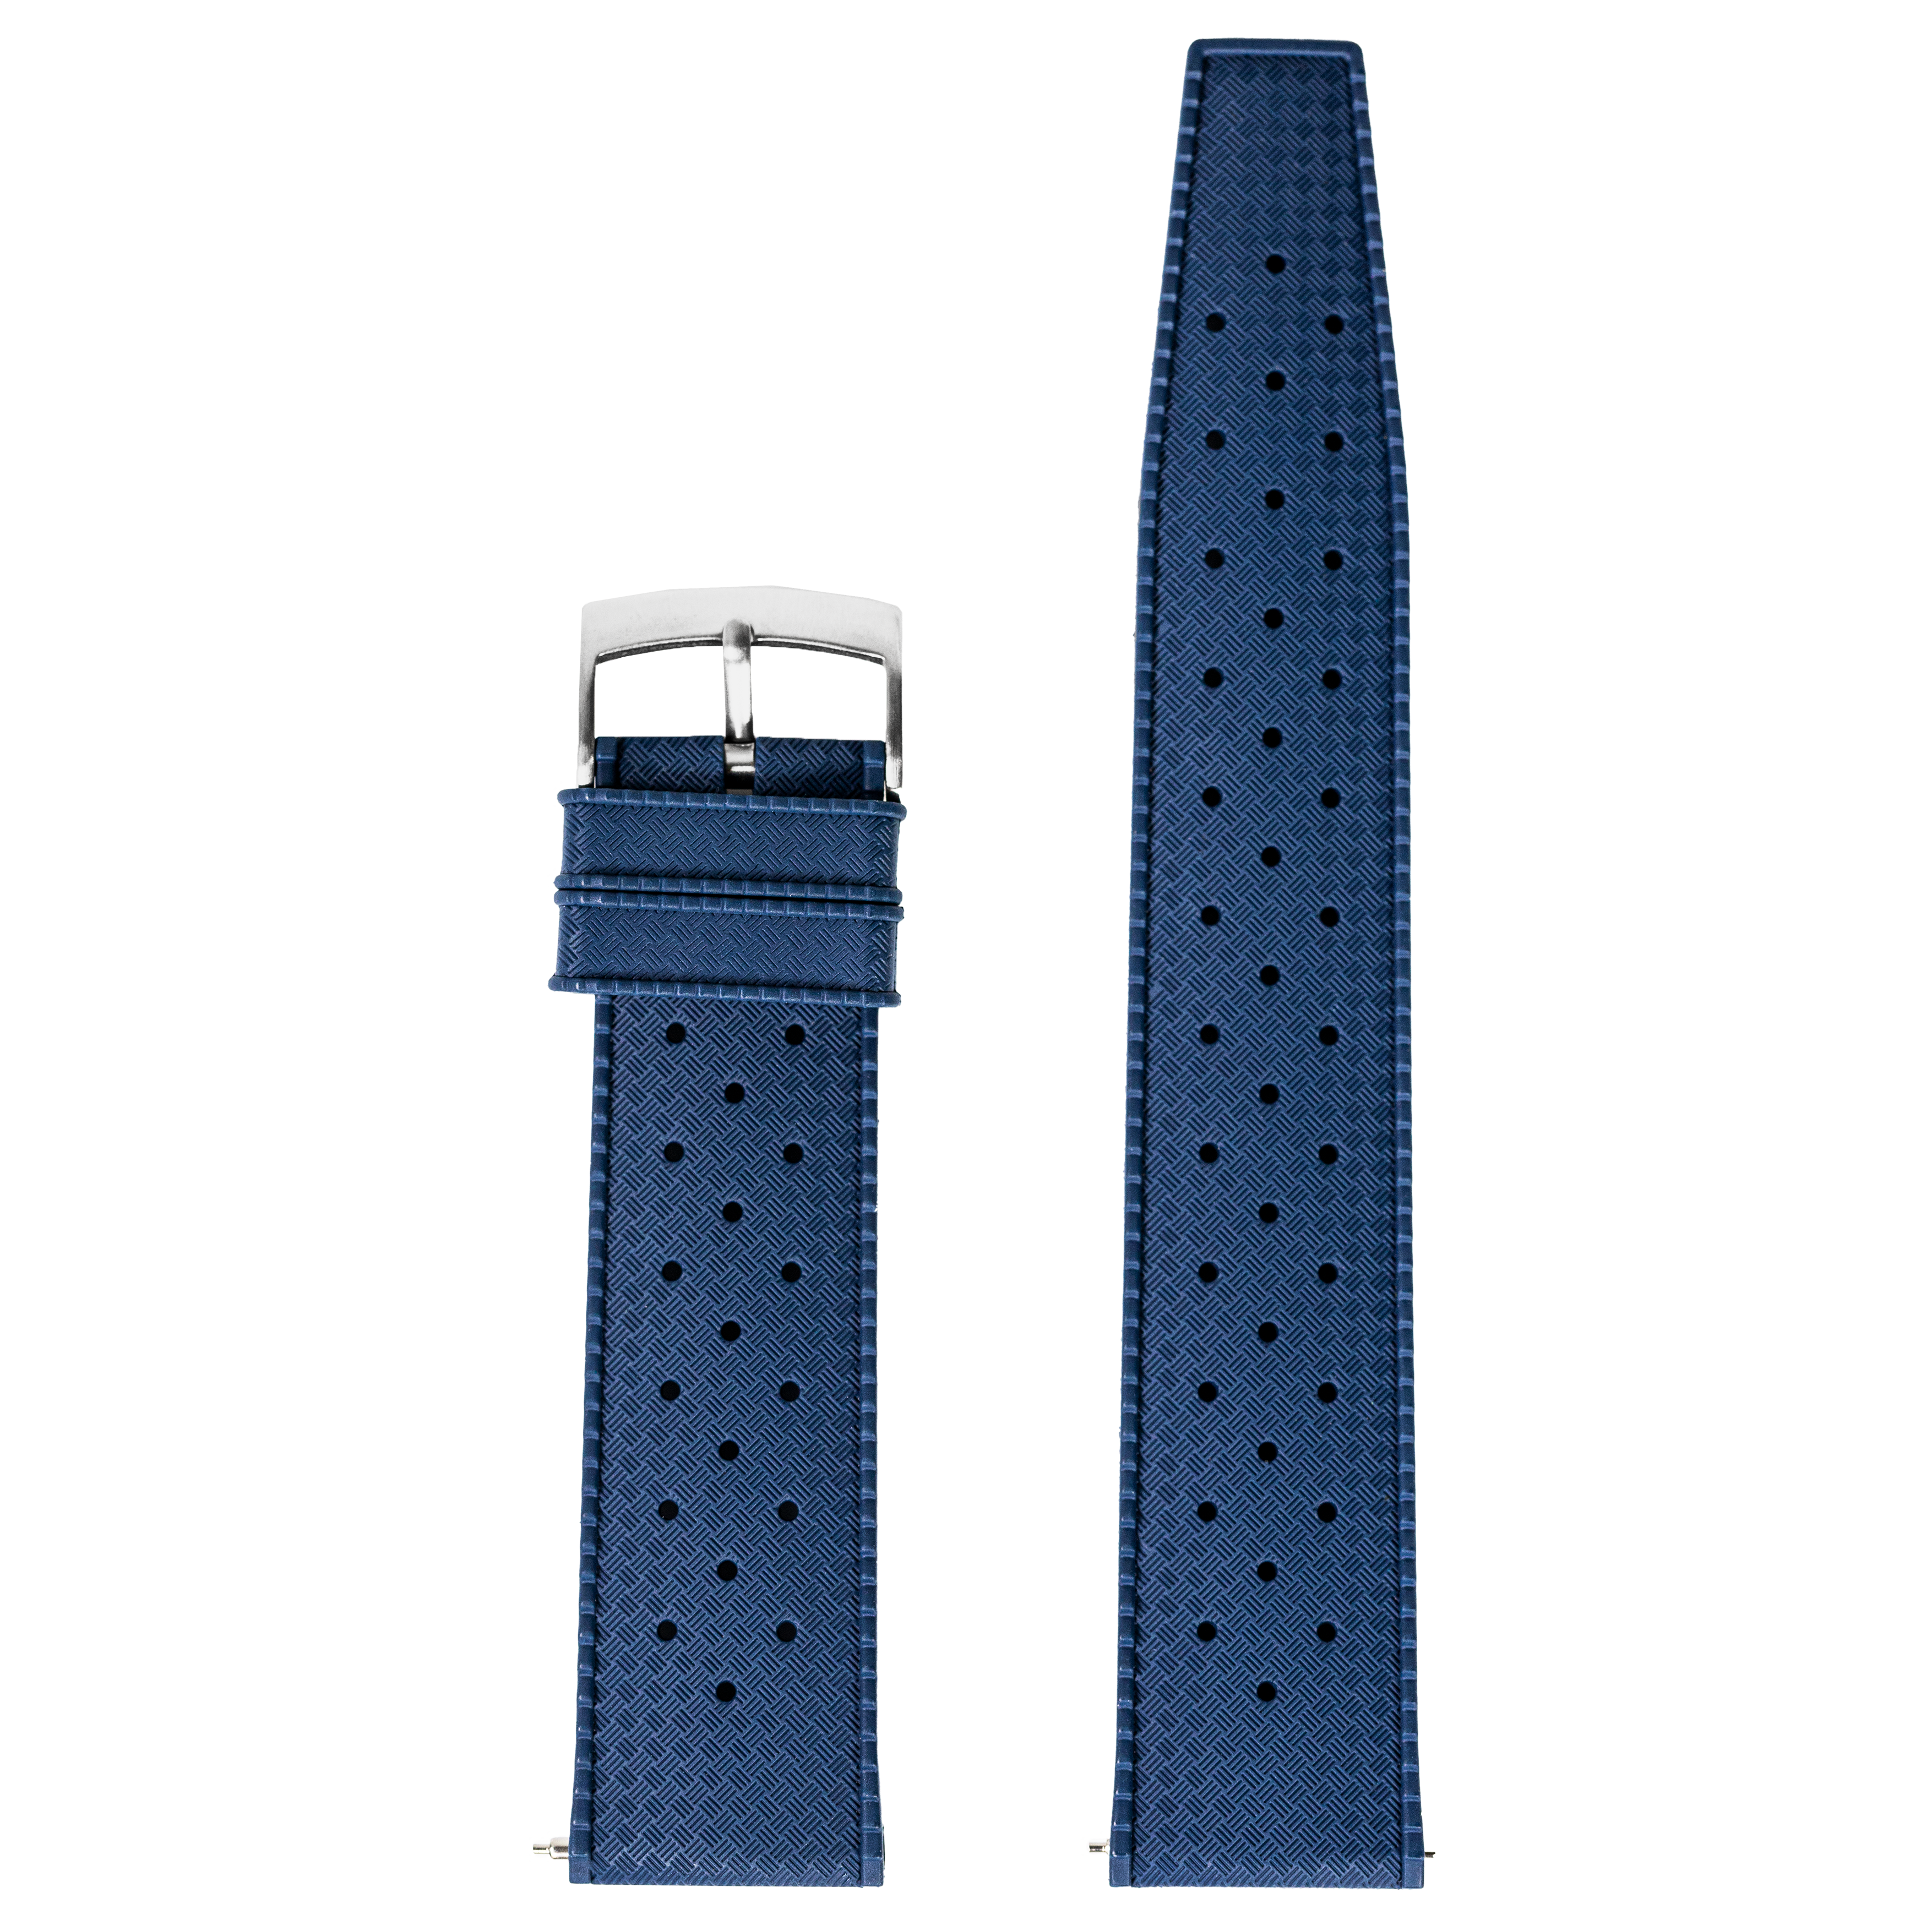 [Quick Release] King Tropic FKM Rubber - Navy Blue